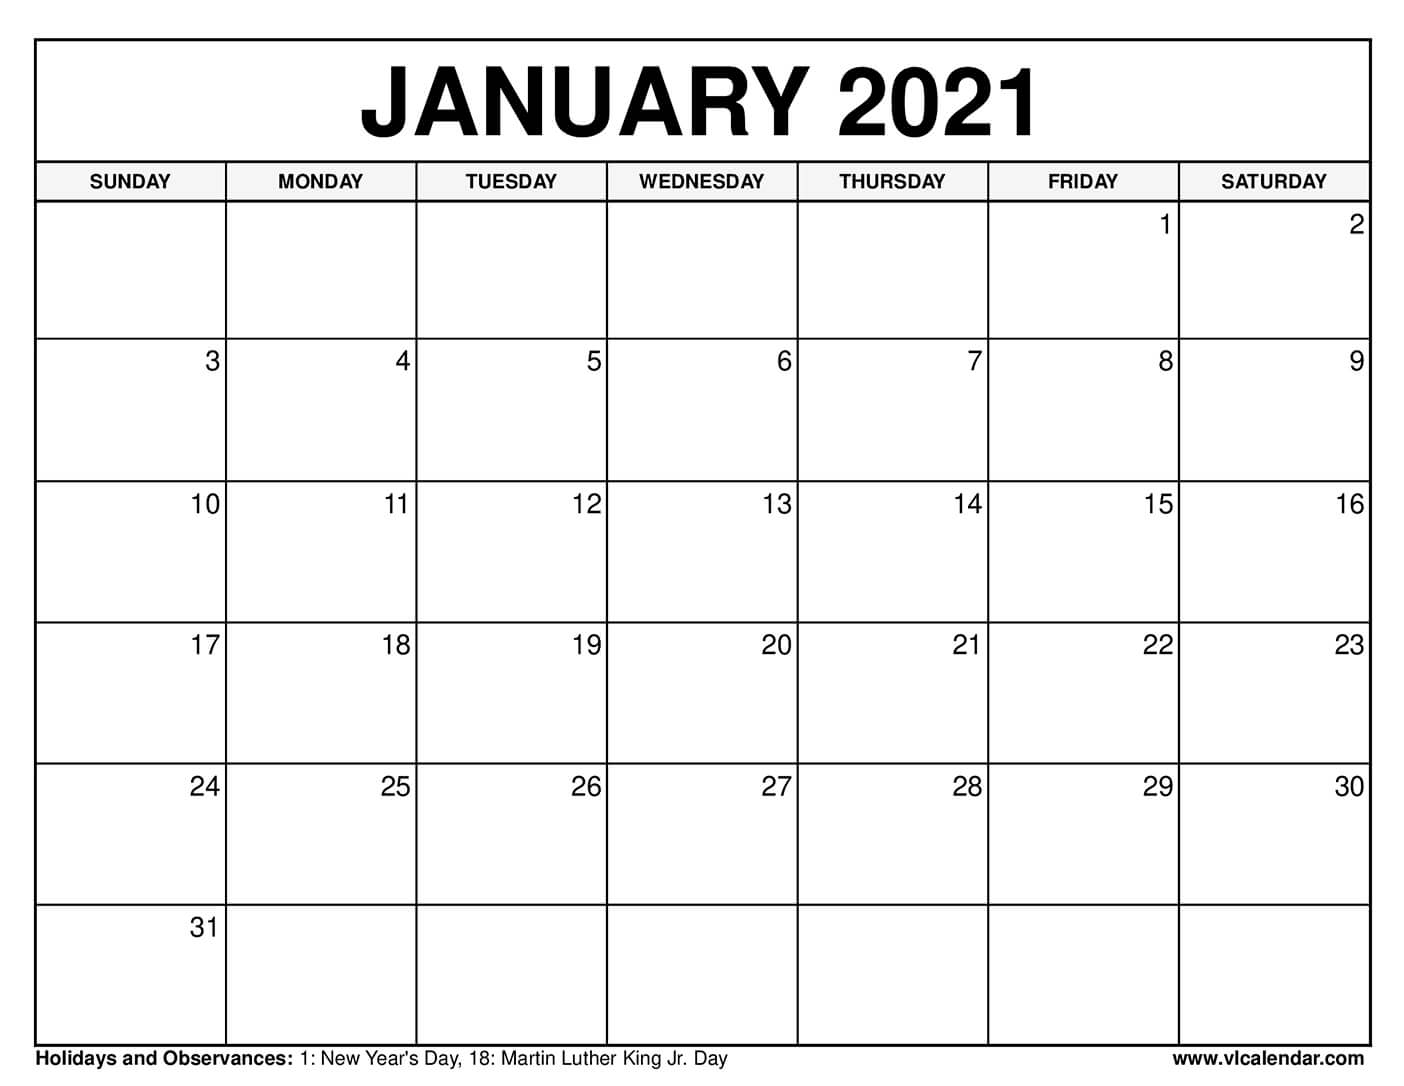 Is January 20th 2021 a holiday?